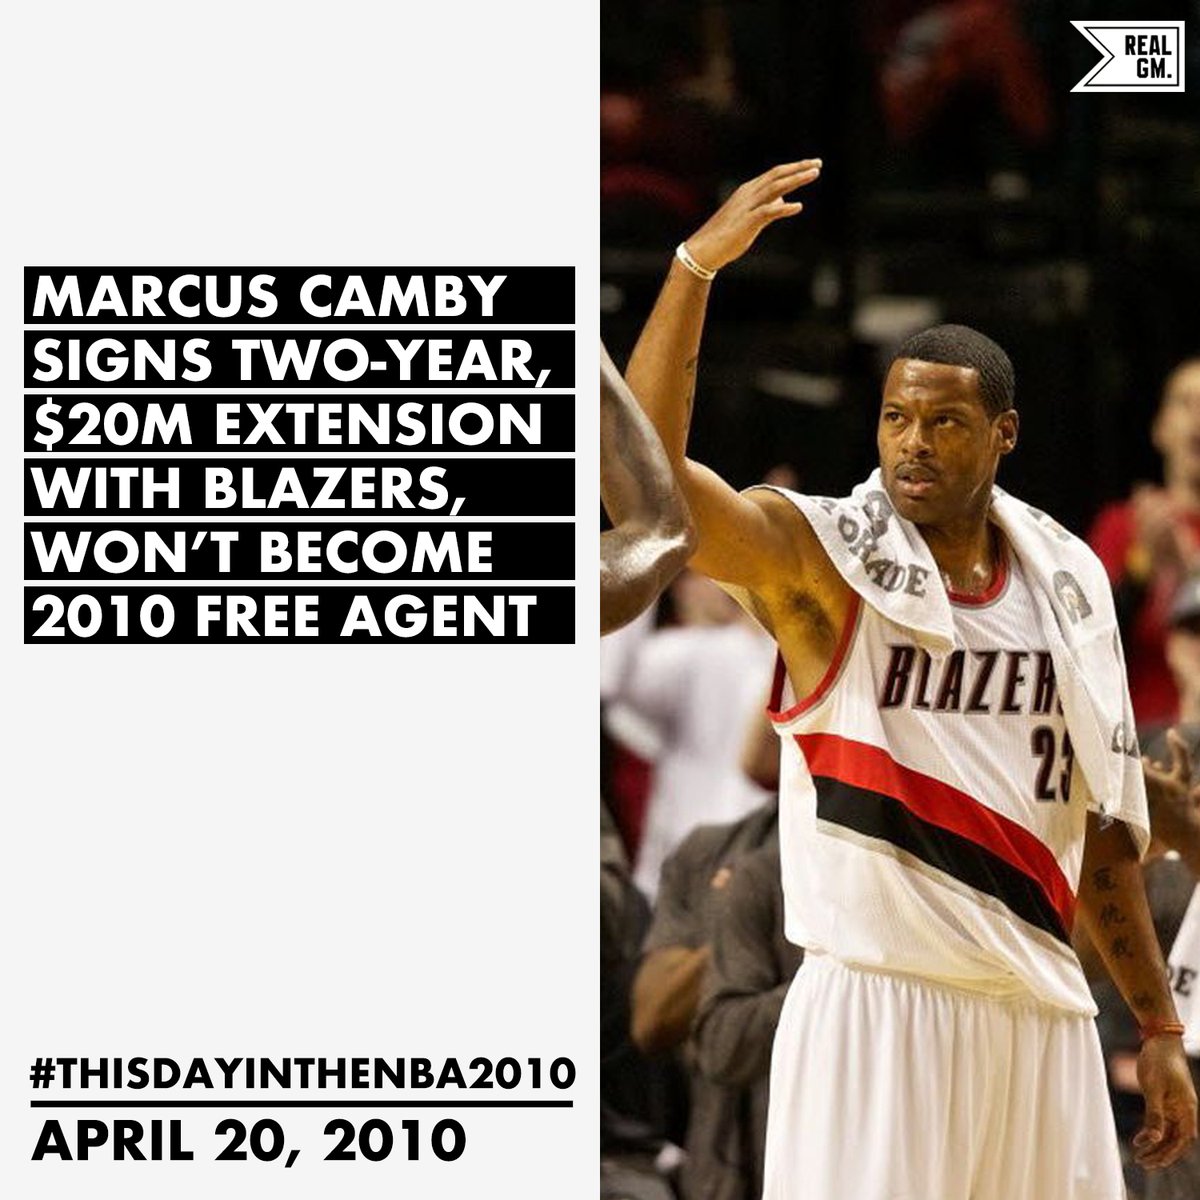  #ThisDayInTheNBA2010April 20, 2010Marcus Camby Signs Two-Year, $20M Extension With Blazers https://basketball.realgm.com/wiretap/203419/Marcus-Camby-Signs-Two-Year-$20M-Extension-With-Blazers